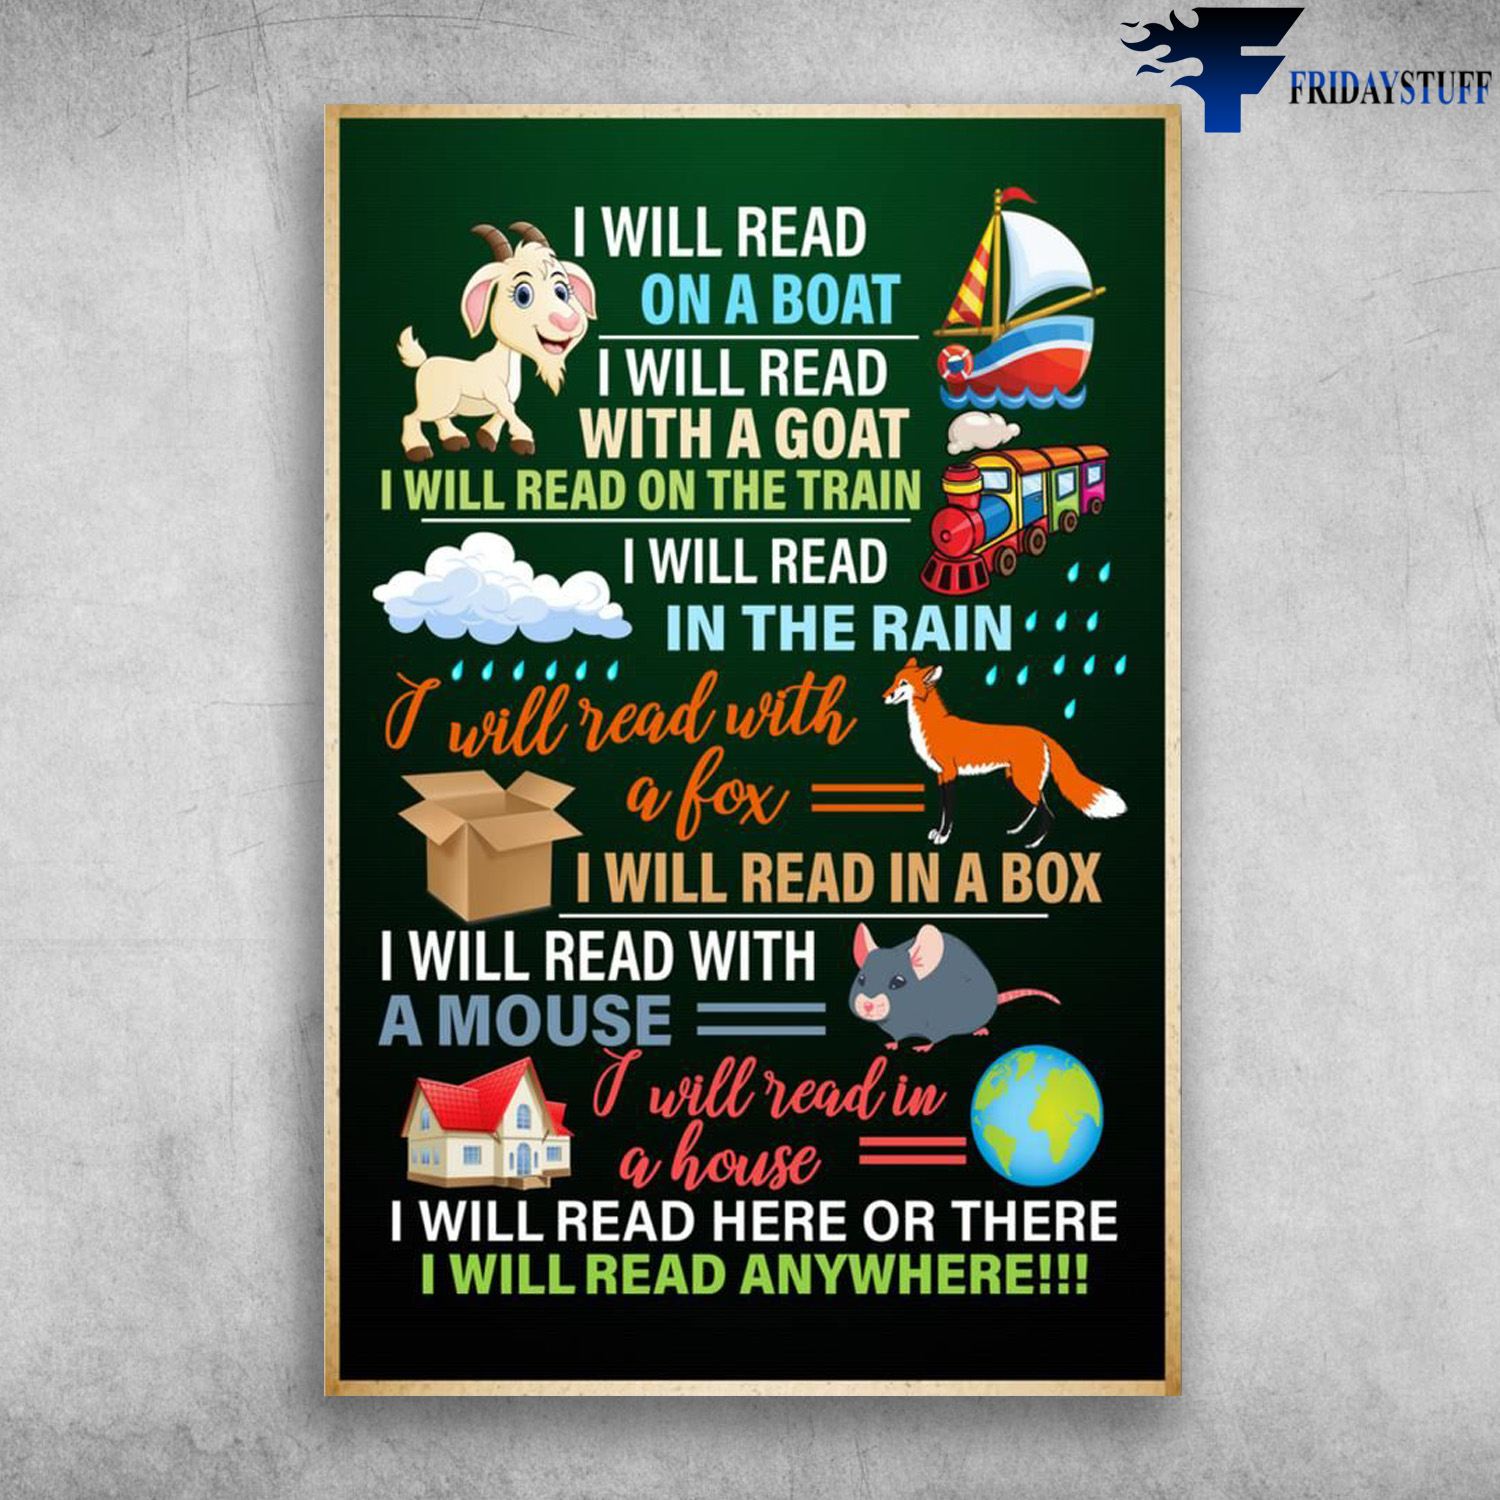 Reading - I Will Read On A Boat, I Will Read With A Goat, I Will Read On The Train, I Will Read In The Rain, I Will Read With A Fox, I Will Read In A Box, I Will Read With A Mouse